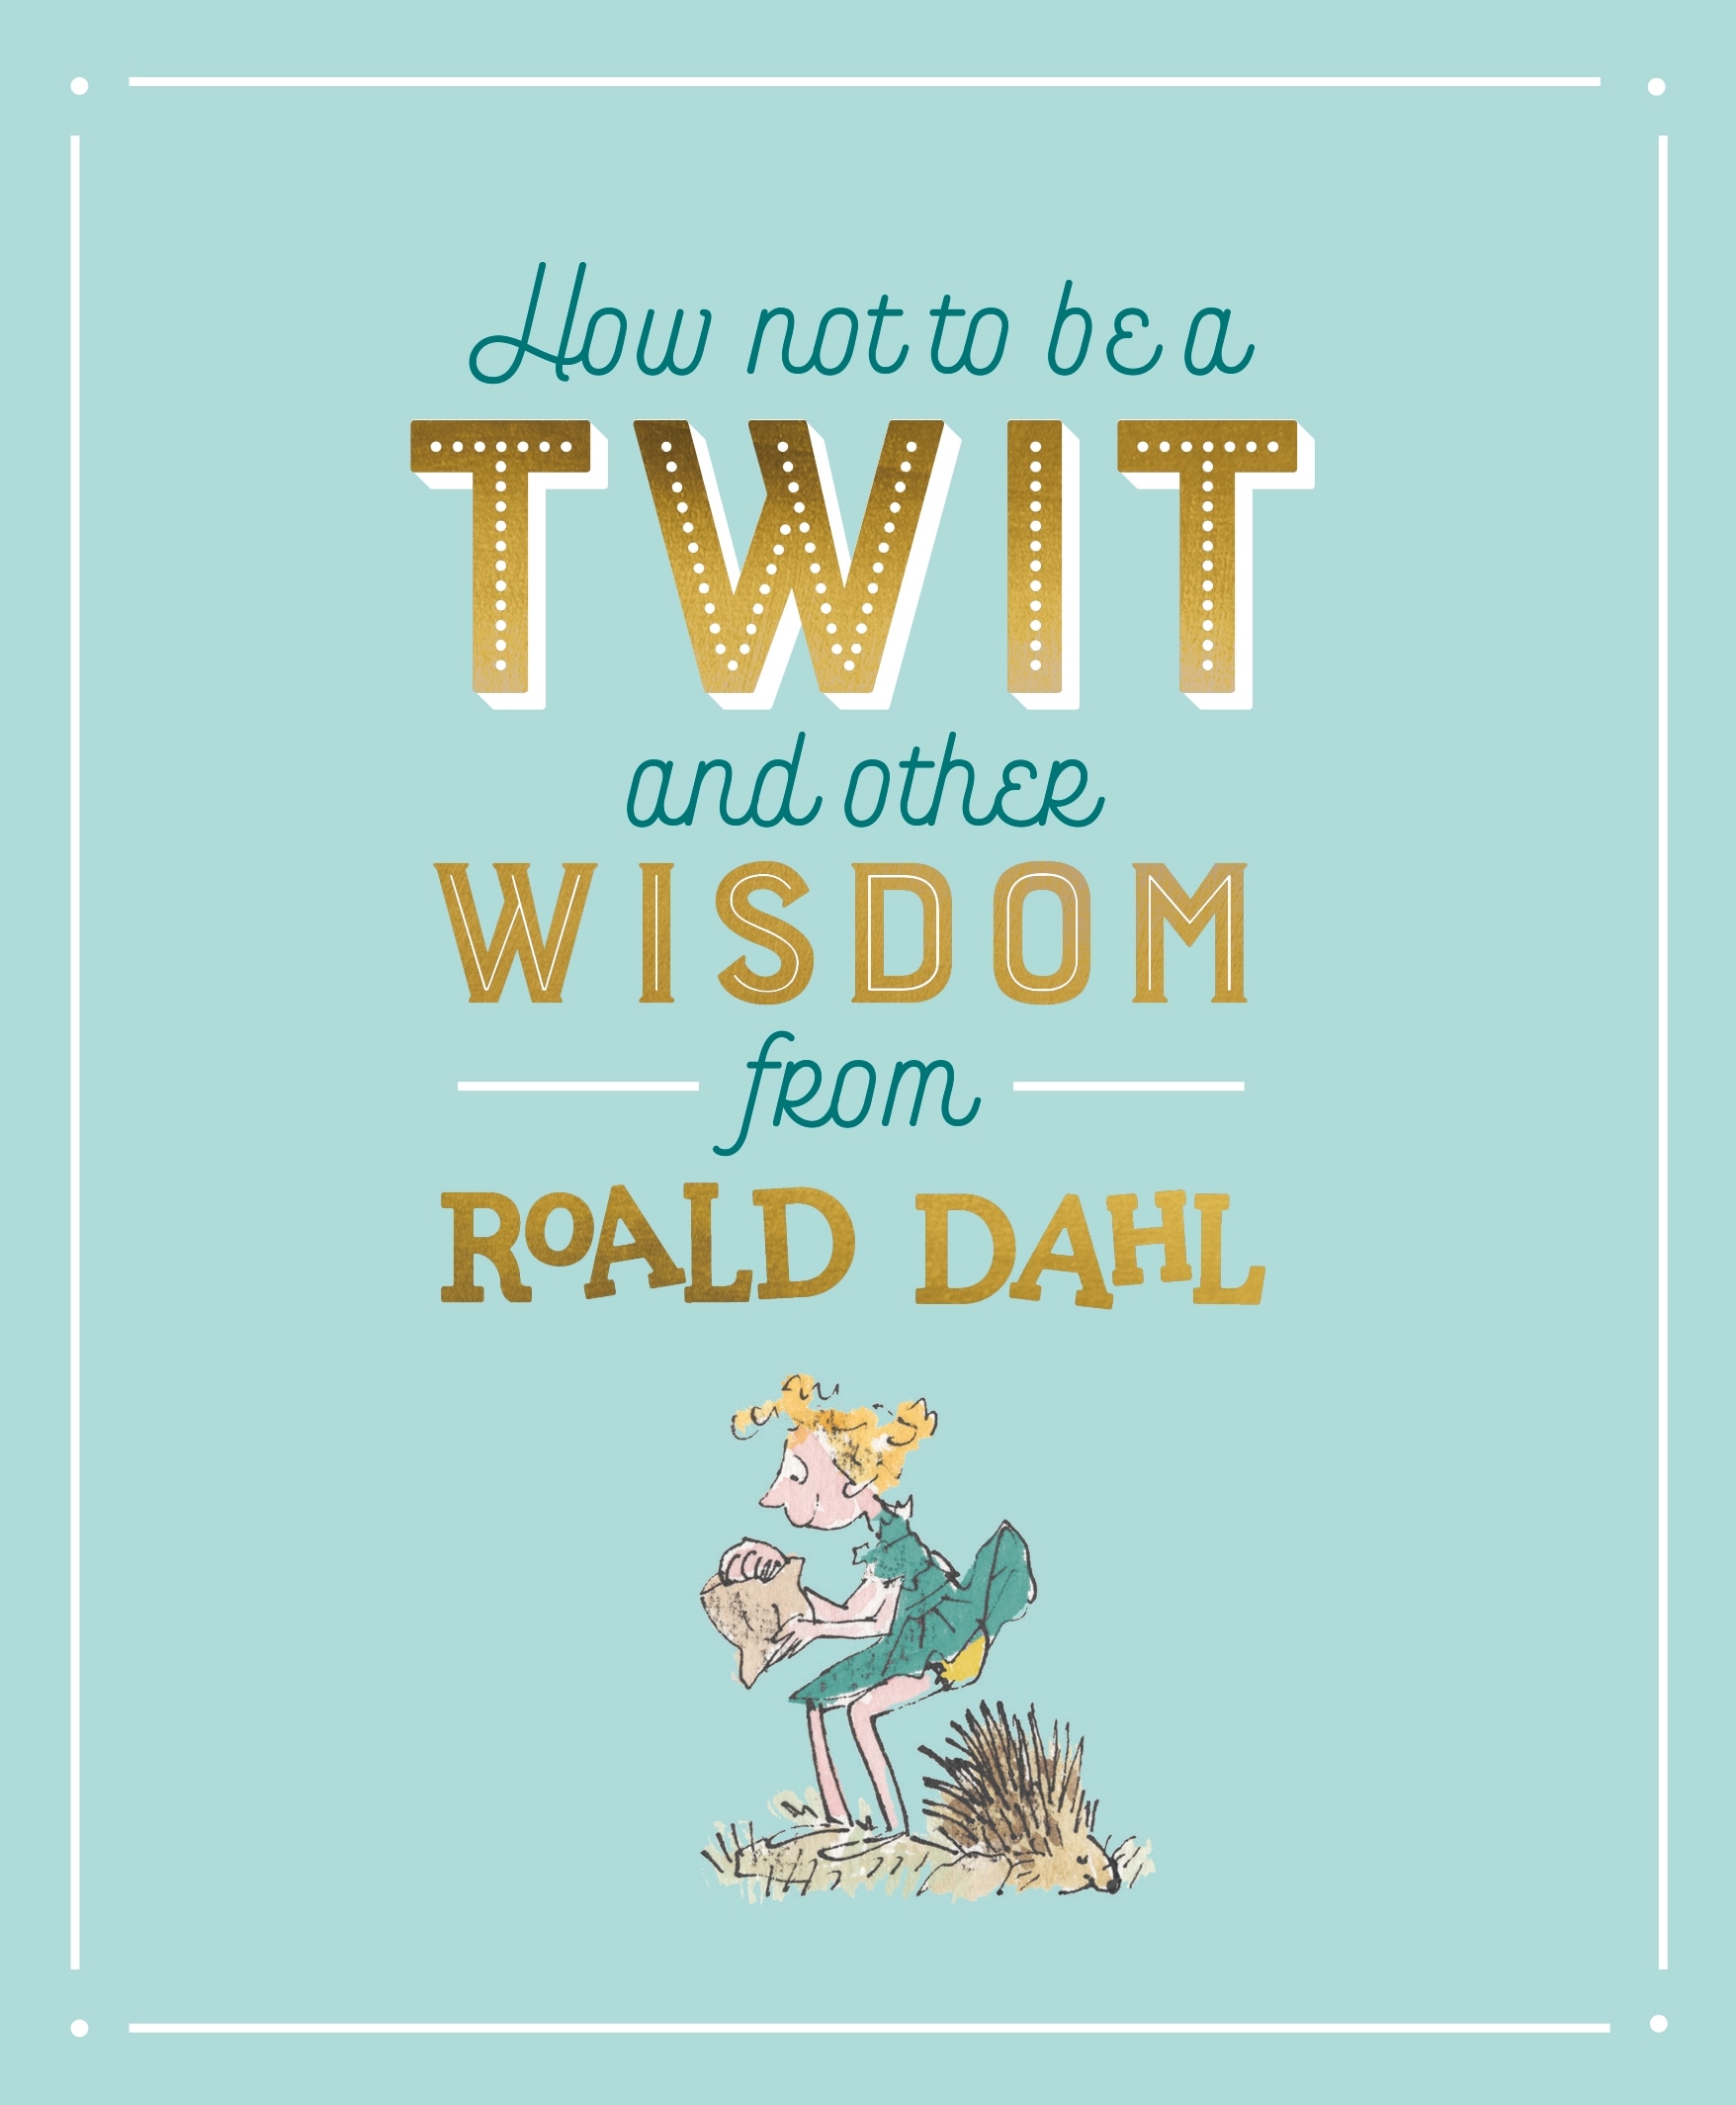 Book “How Not To Be A Twit and Other Wisdom from Roald Dahl” by Roald Dahl — September 6, 2018